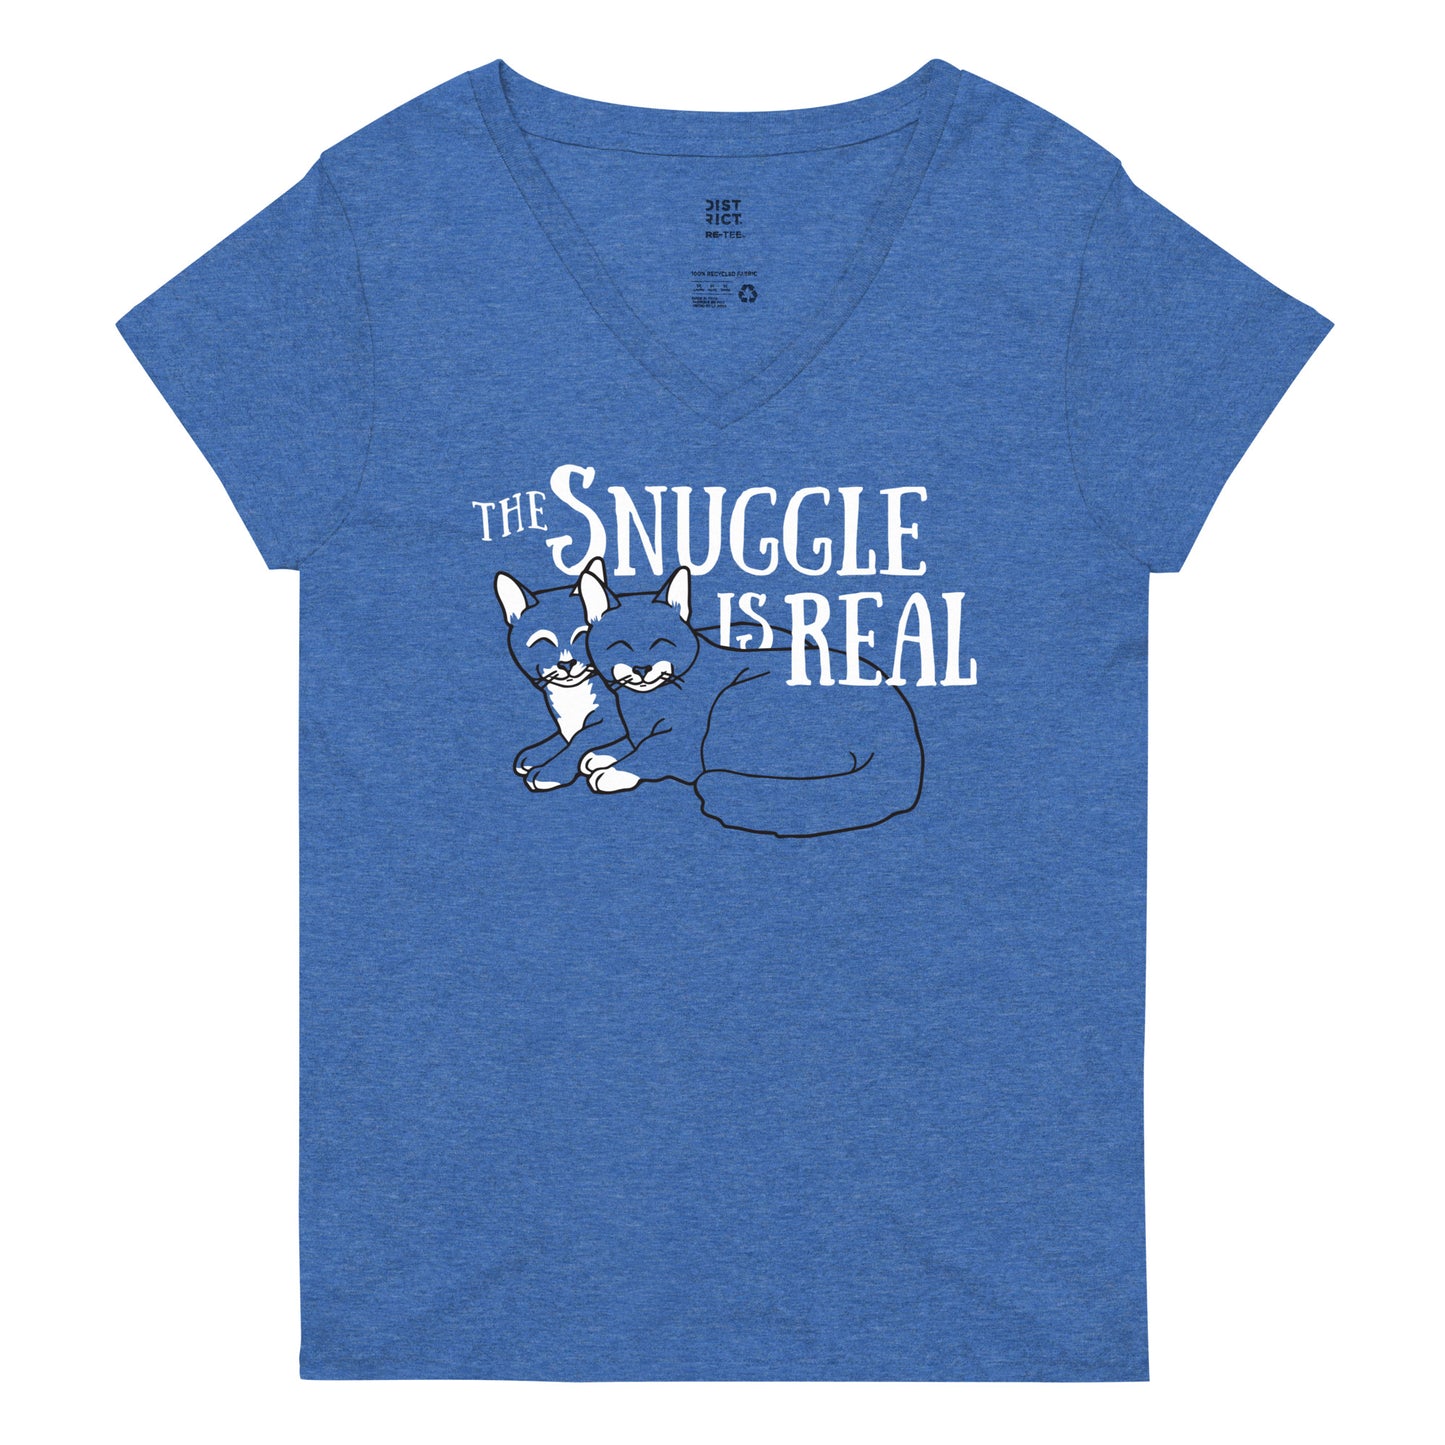 The Snuggle Is Real Women's V-Neck Tee